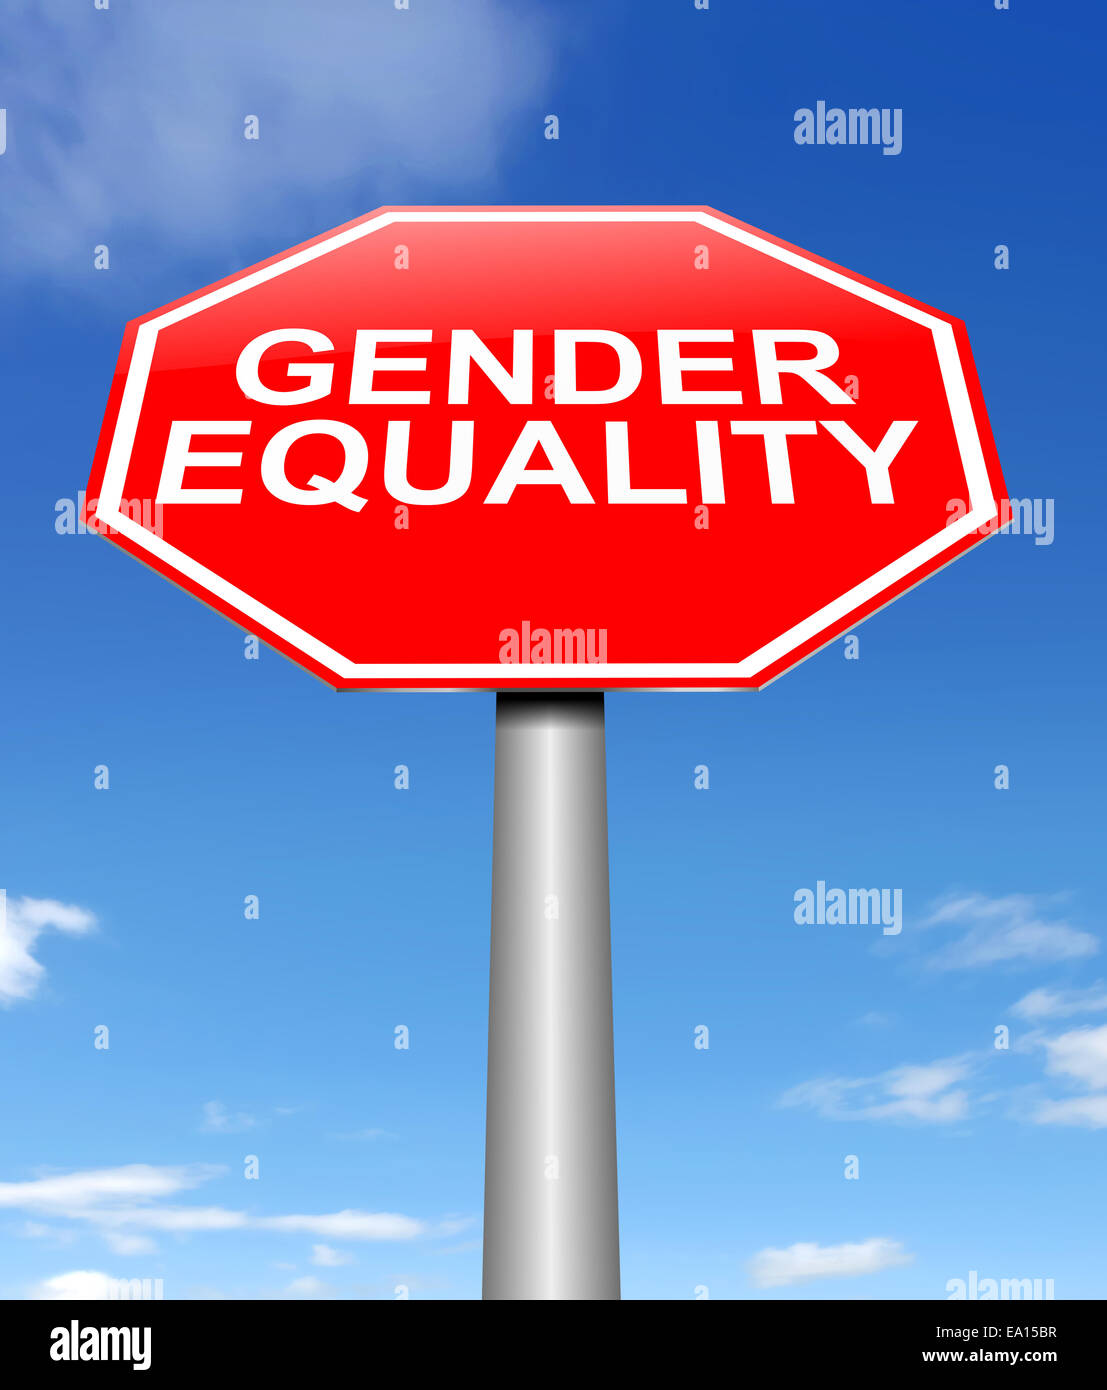 Gender equality concept. Stock Photo